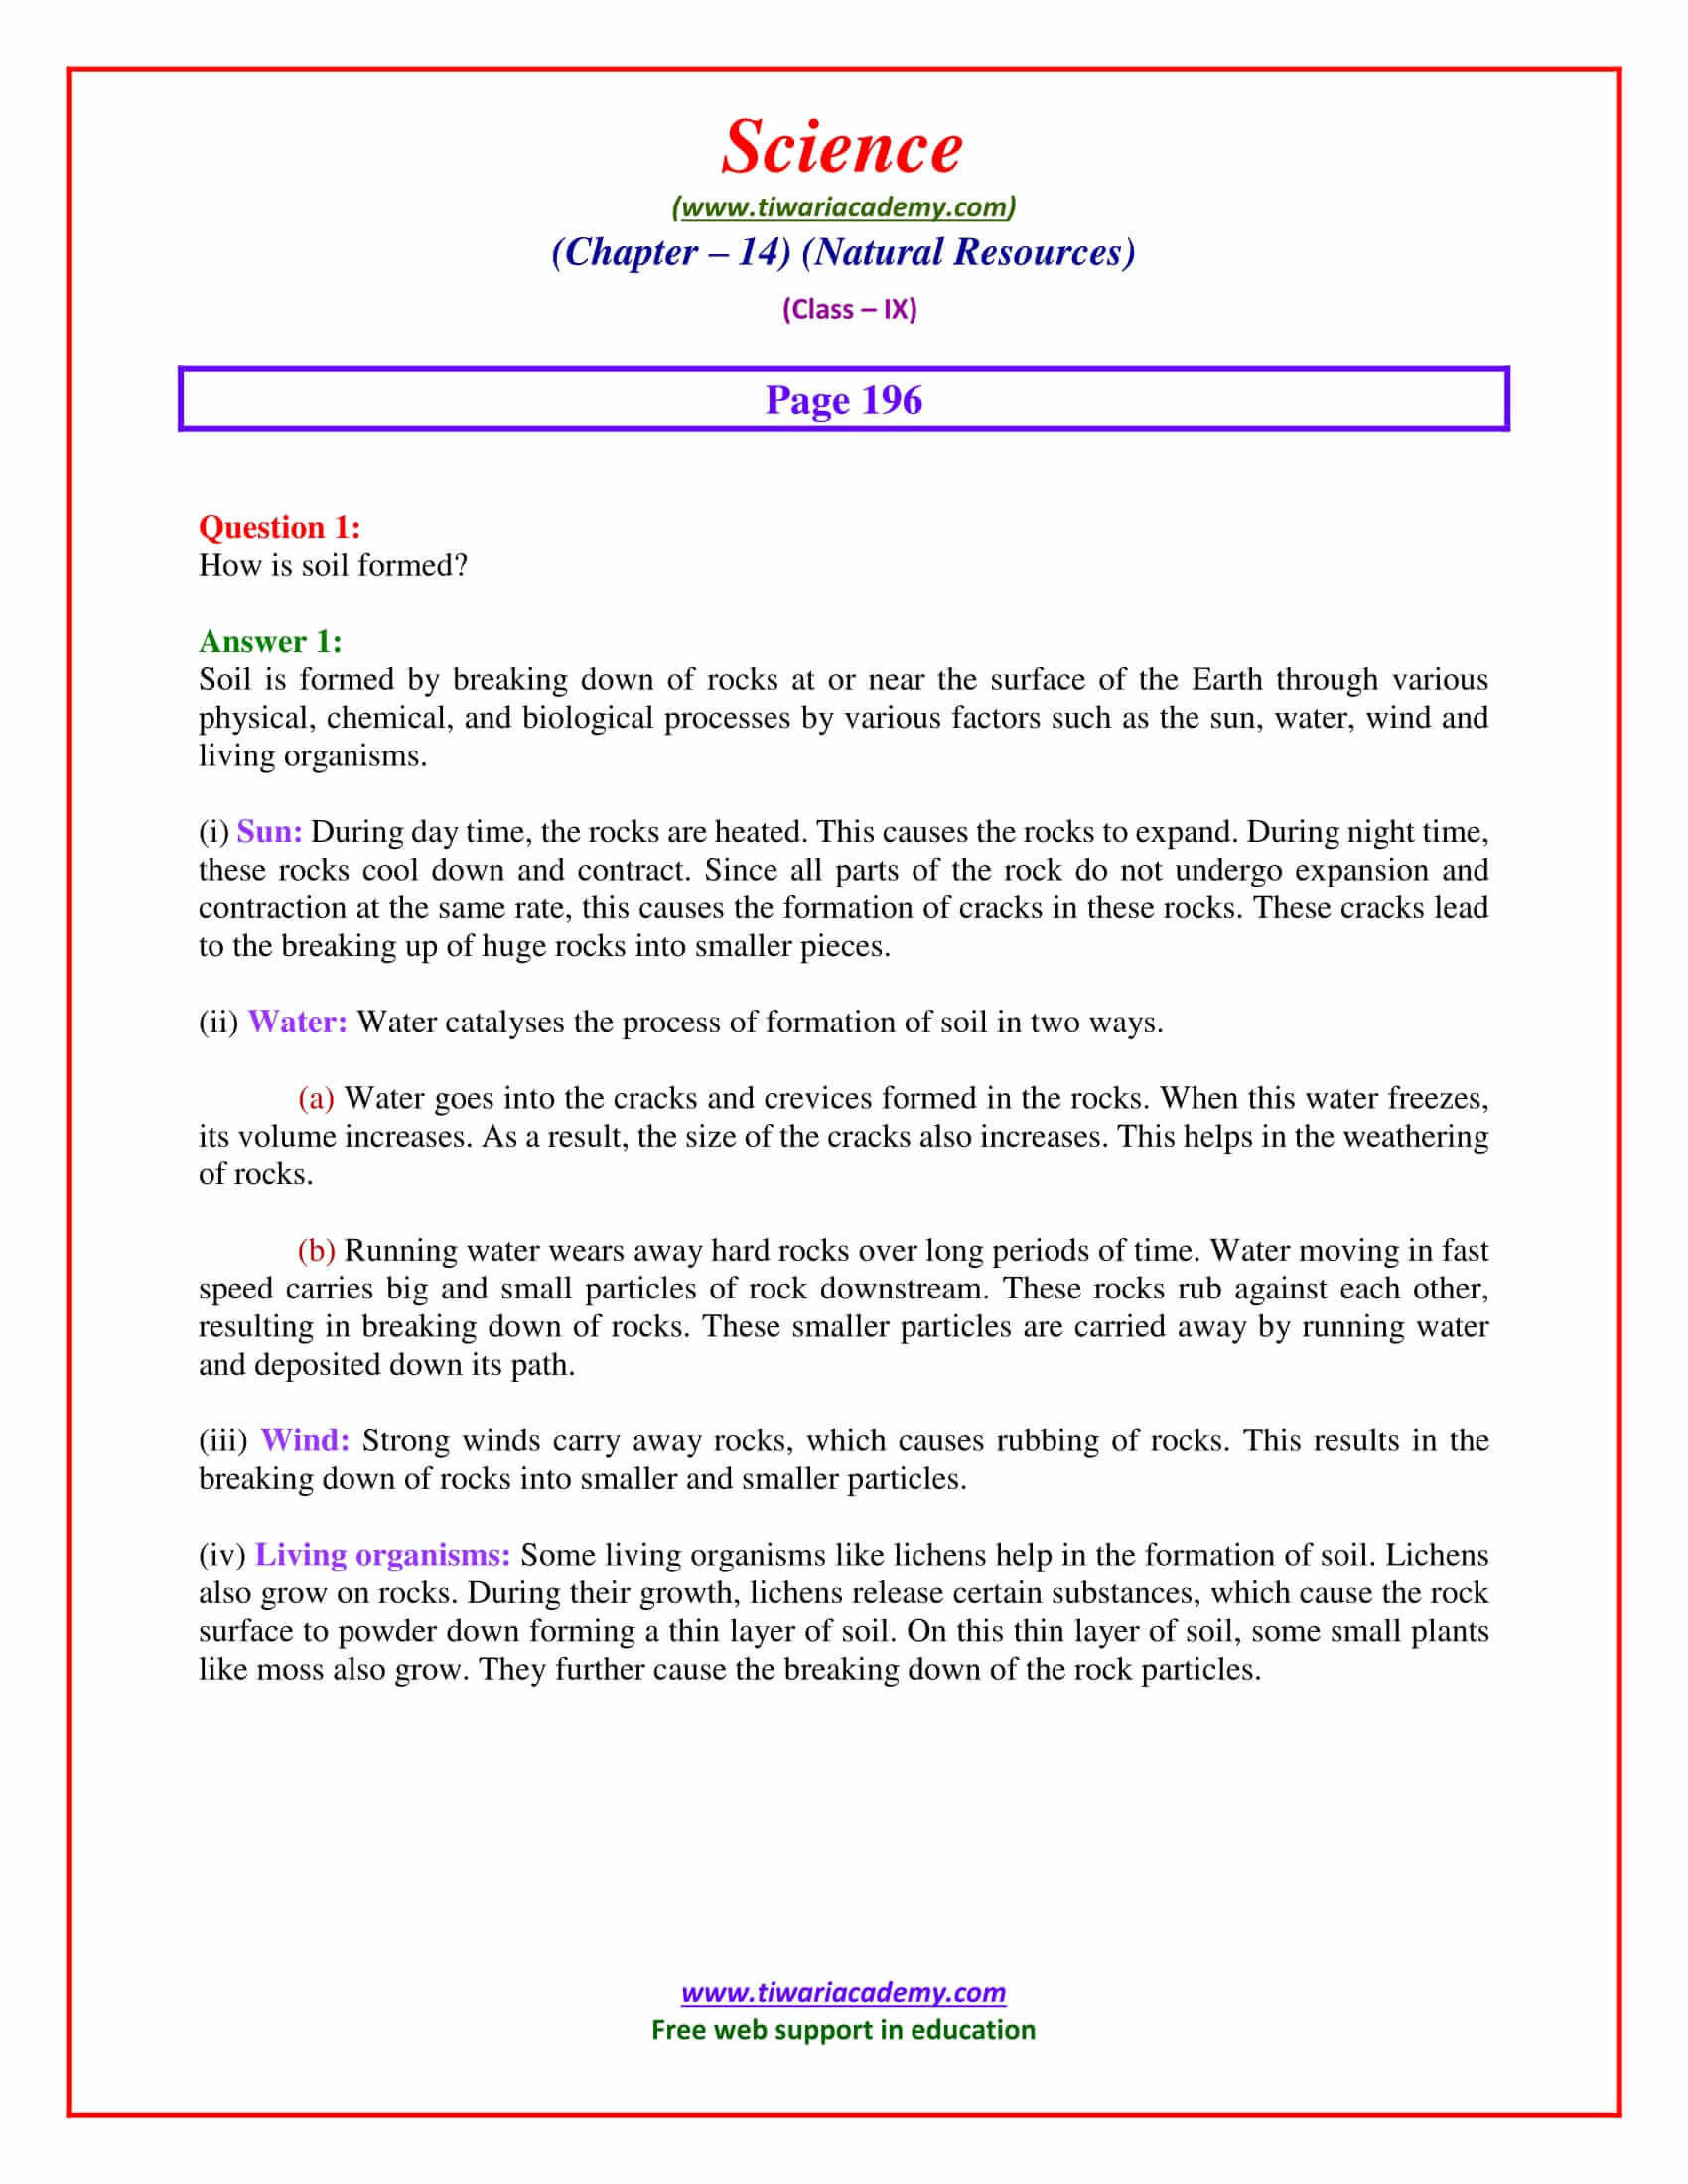 NCERT Solutions for Class 9 Science Chapter 14 Natural Resources Intext Questions Page 196